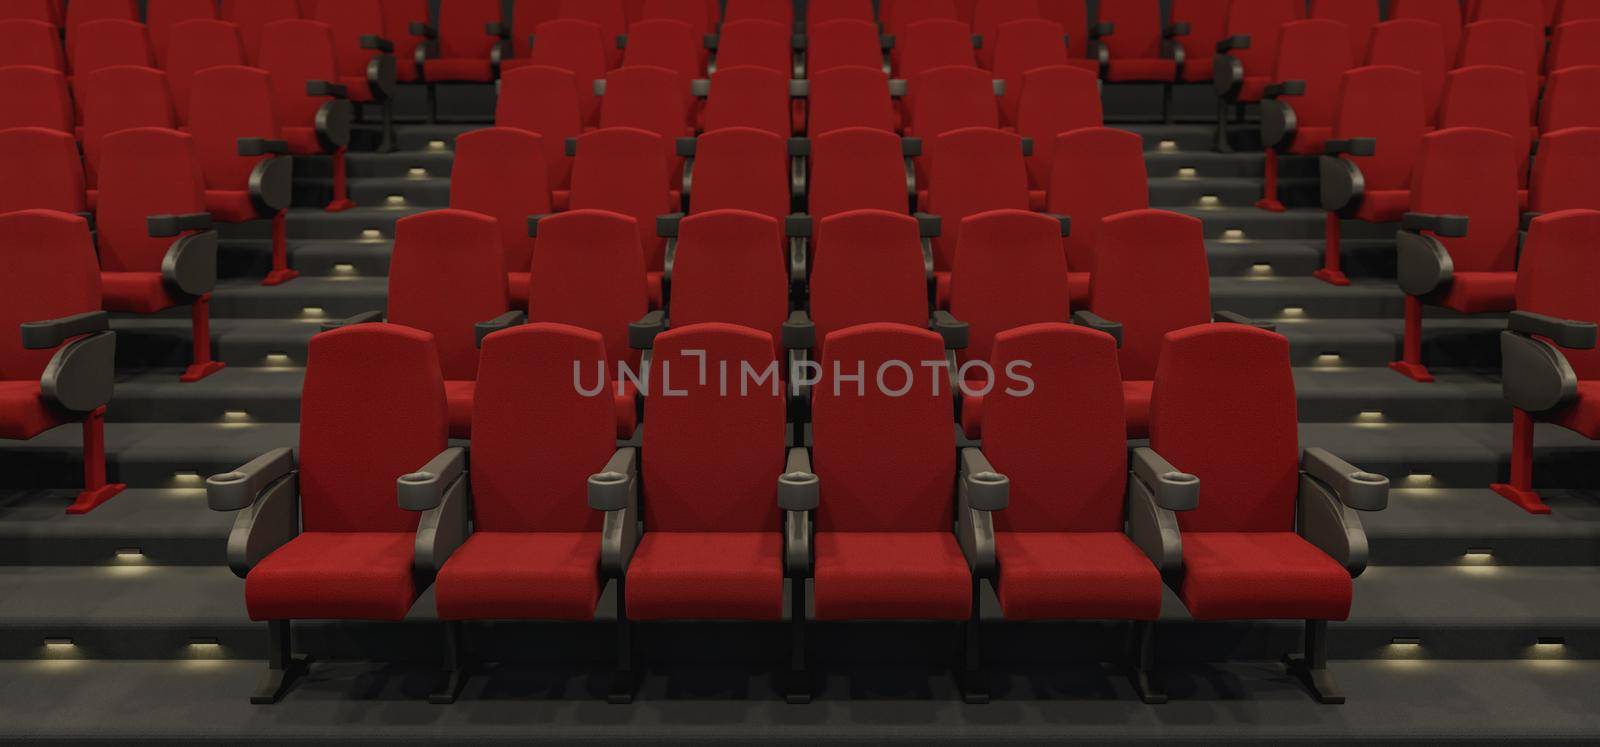 Cinema hall with red seats by asolano